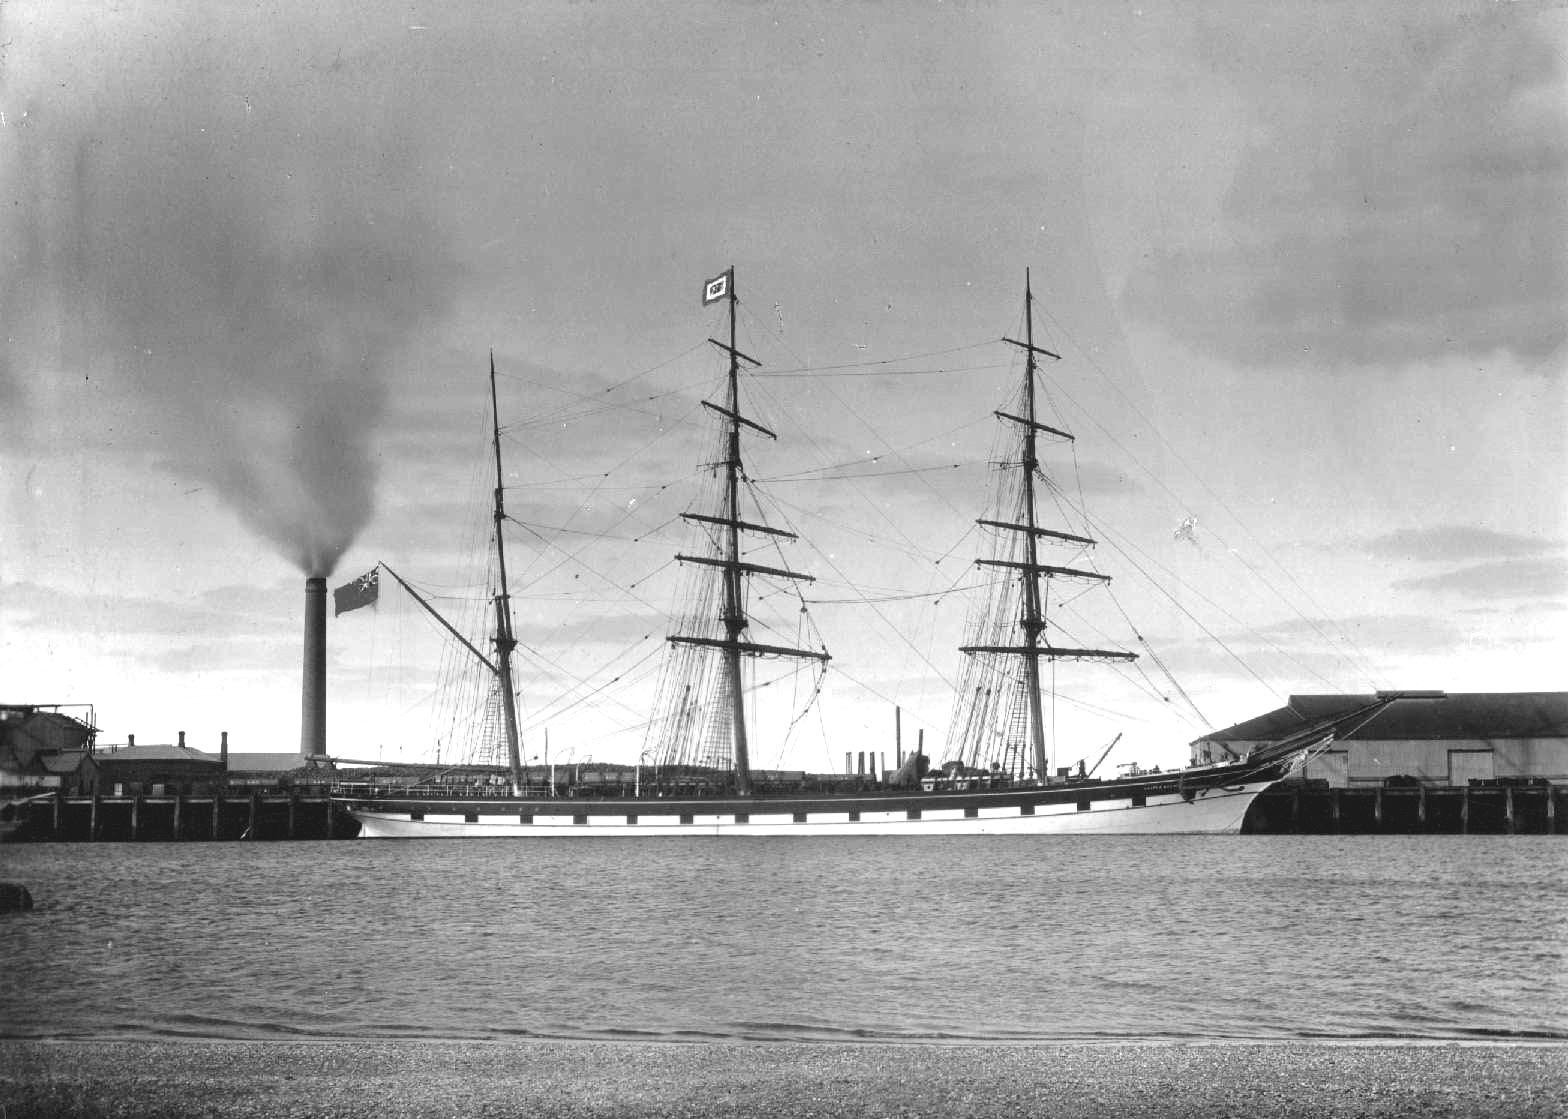 1875 barque moored at Port Adelaide.